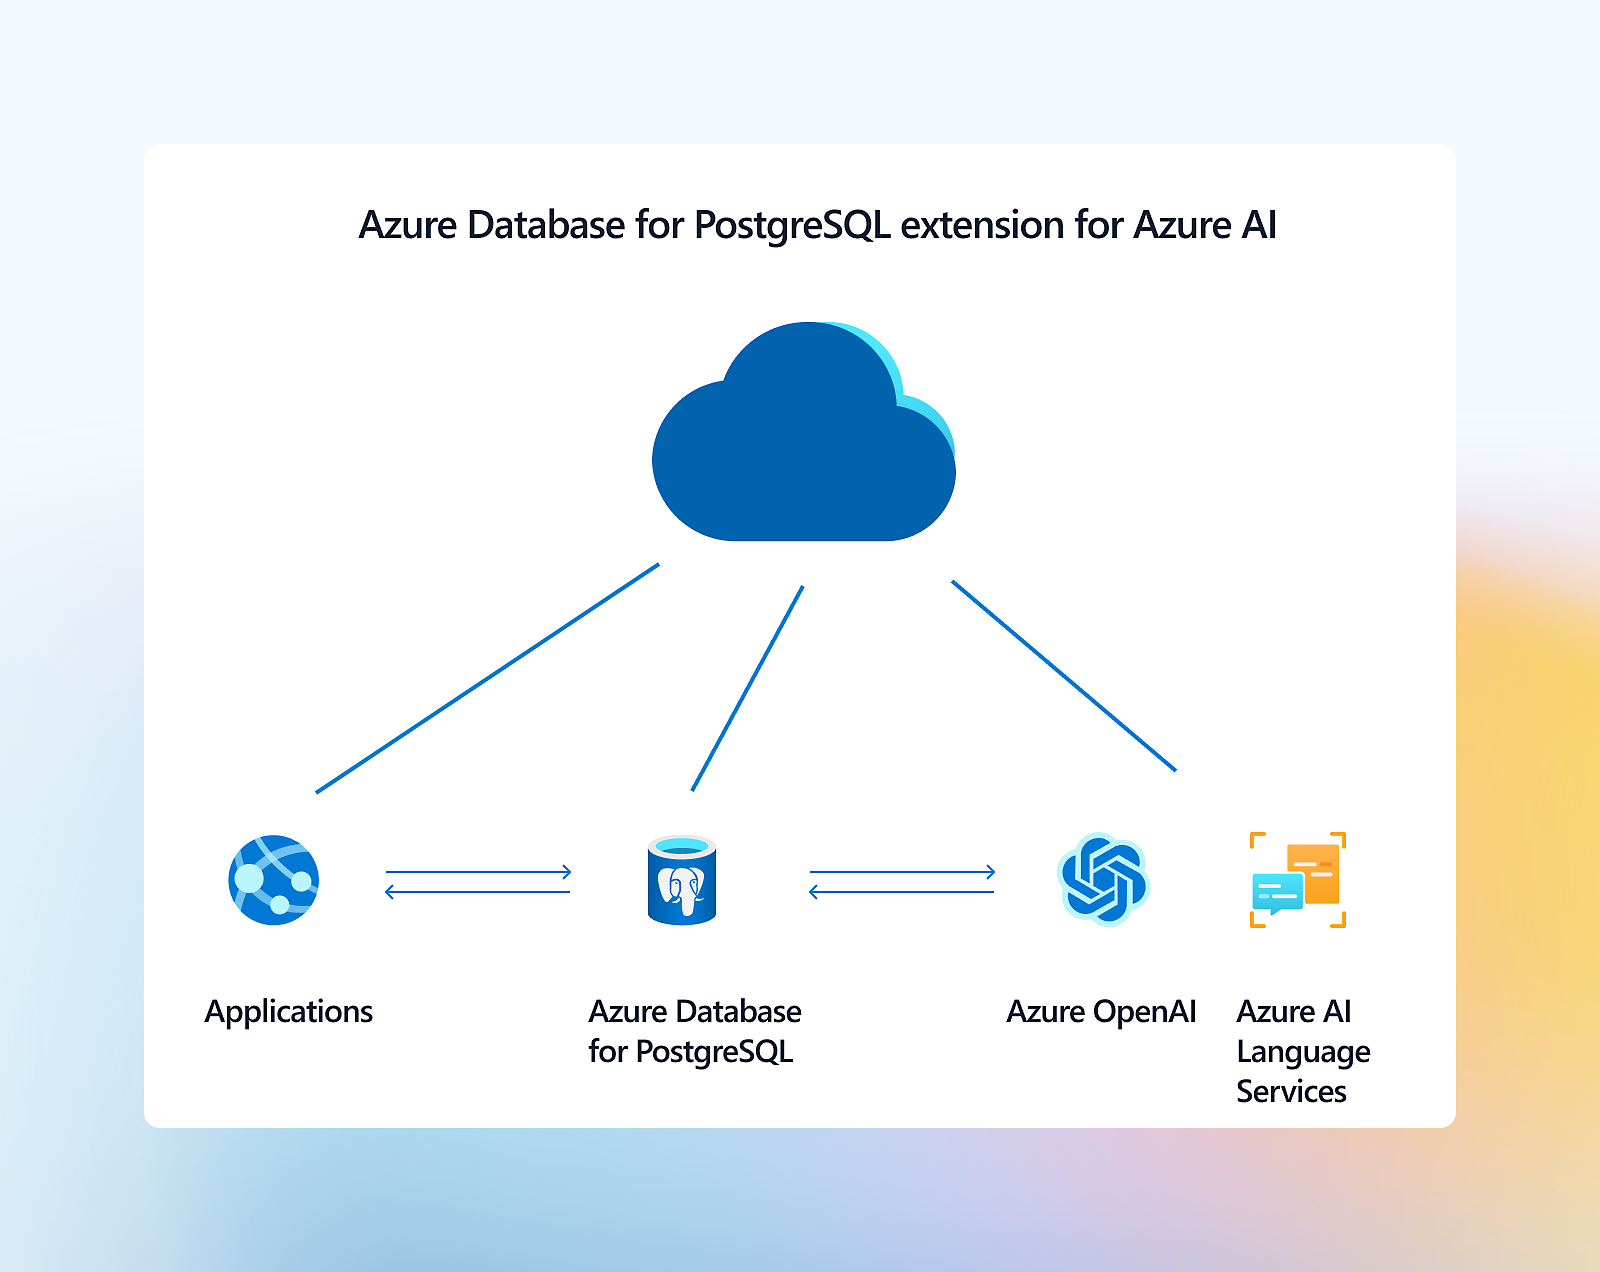  azure database for postgresql extension for azure ai shows a cloud connected by arrows to icons representing application